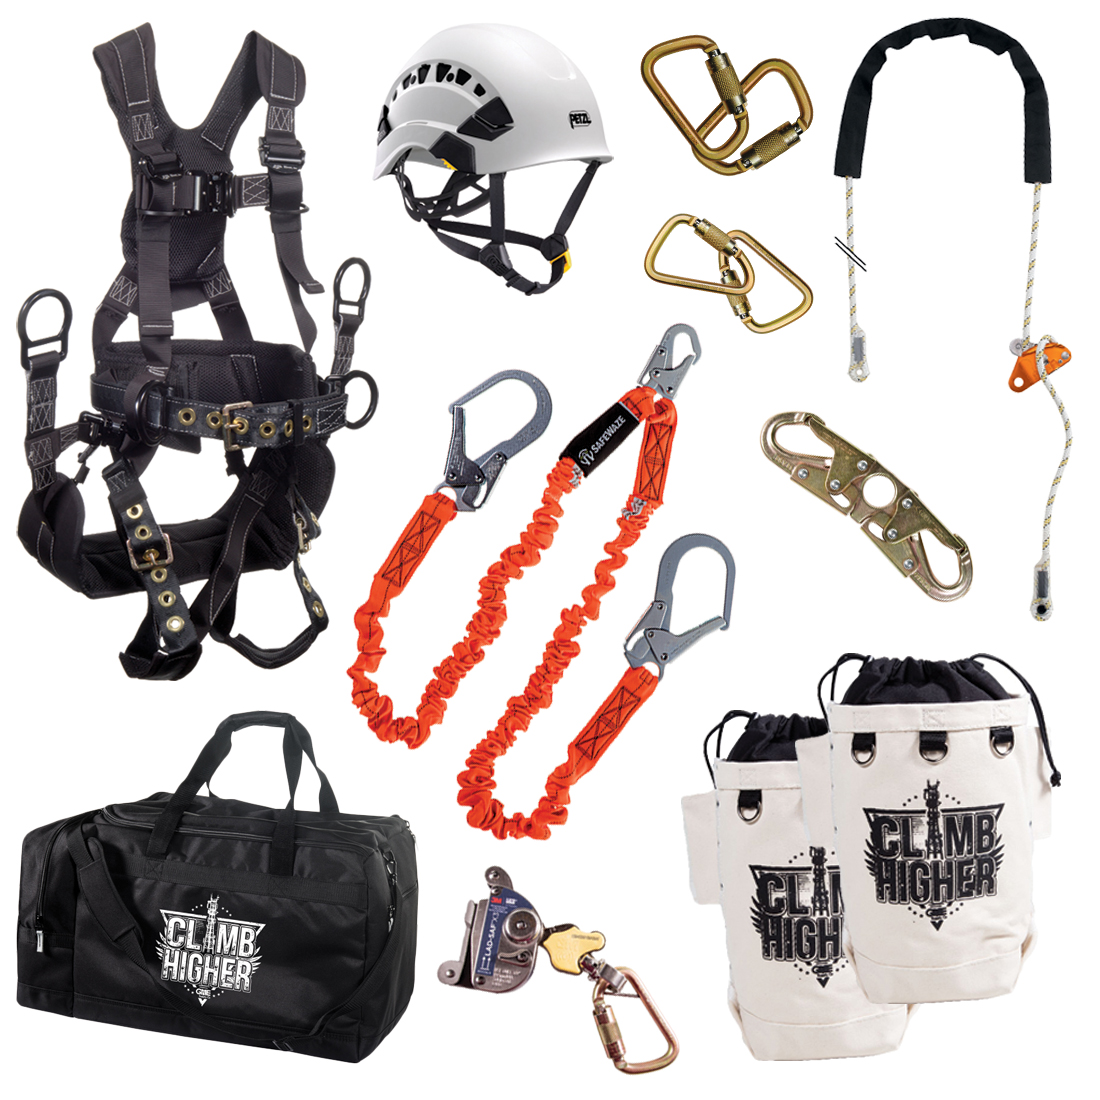 GME Supply 90019 Peregrine Tower Climbing Kit from Columbia Safety